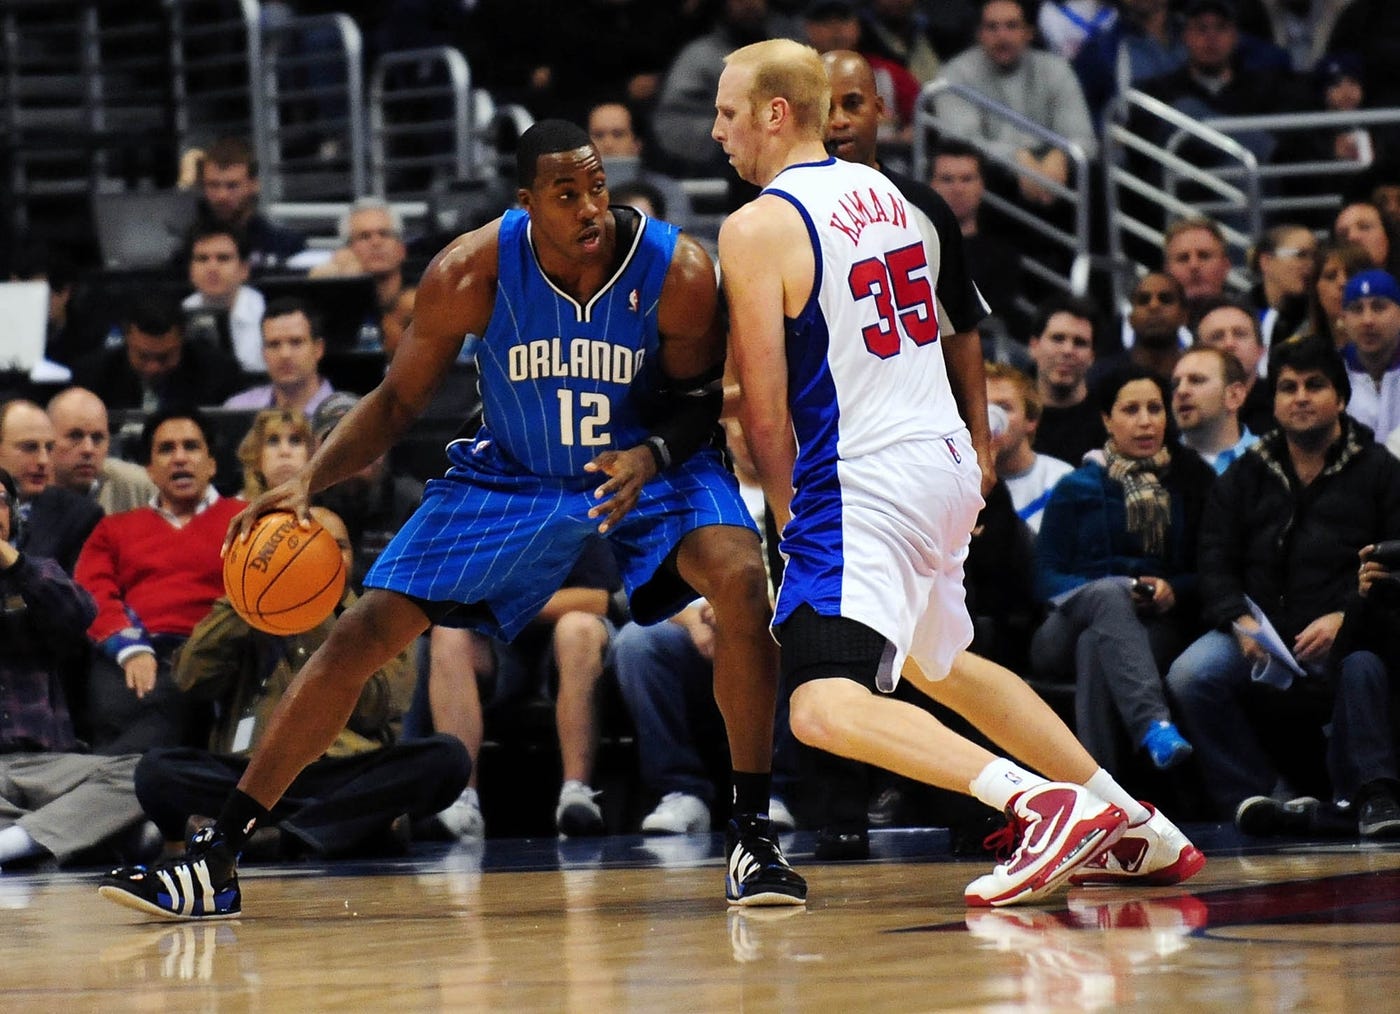 December 8, 2009; Los Angeles, CA, USA; Orlando Magic center Dwight Howard (12) moves the ball against the defense of Los Angeles Clippers center Chris Kaman (35) during the second half at the Staples Center. Orlando defeats Los Angeles 97-86.